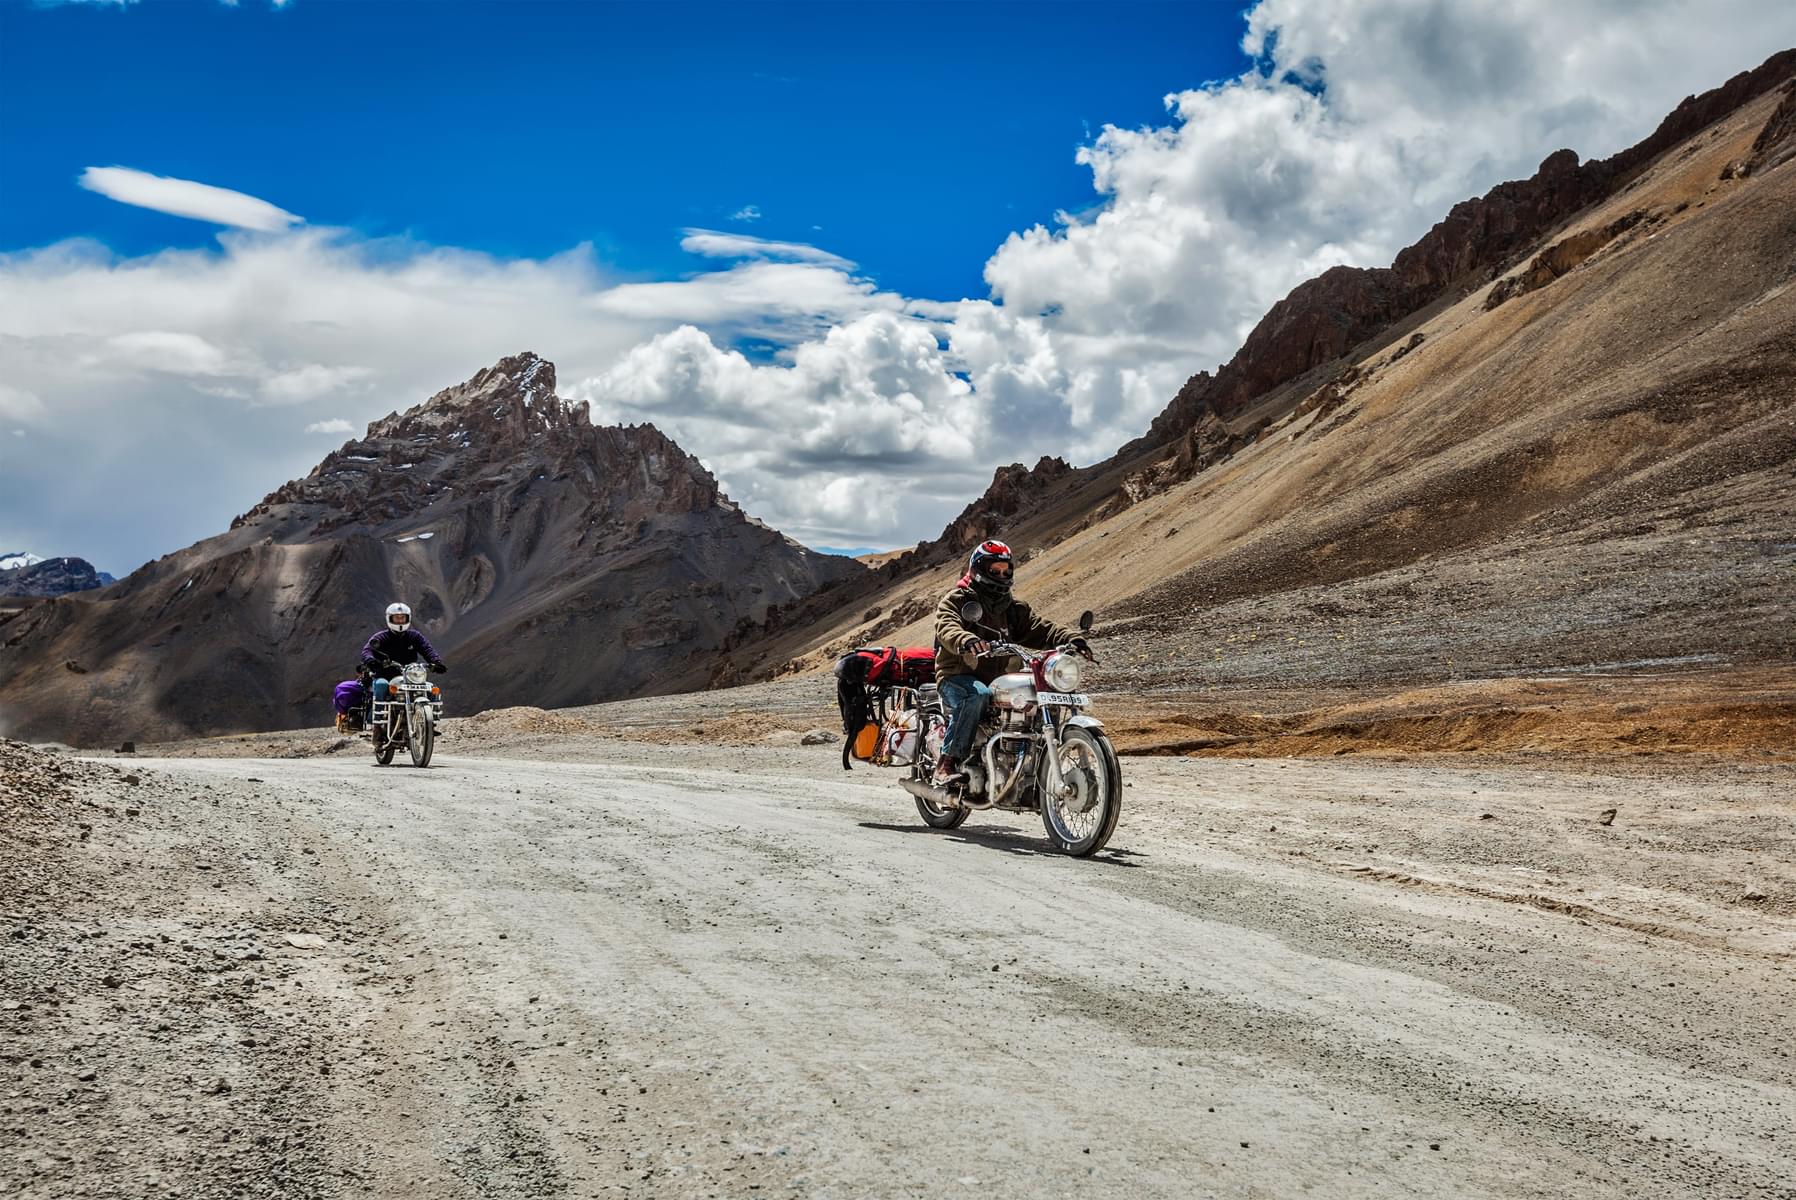 Experience the thrill of riding on some of the most difficult terrains in Ladakh with a bike.